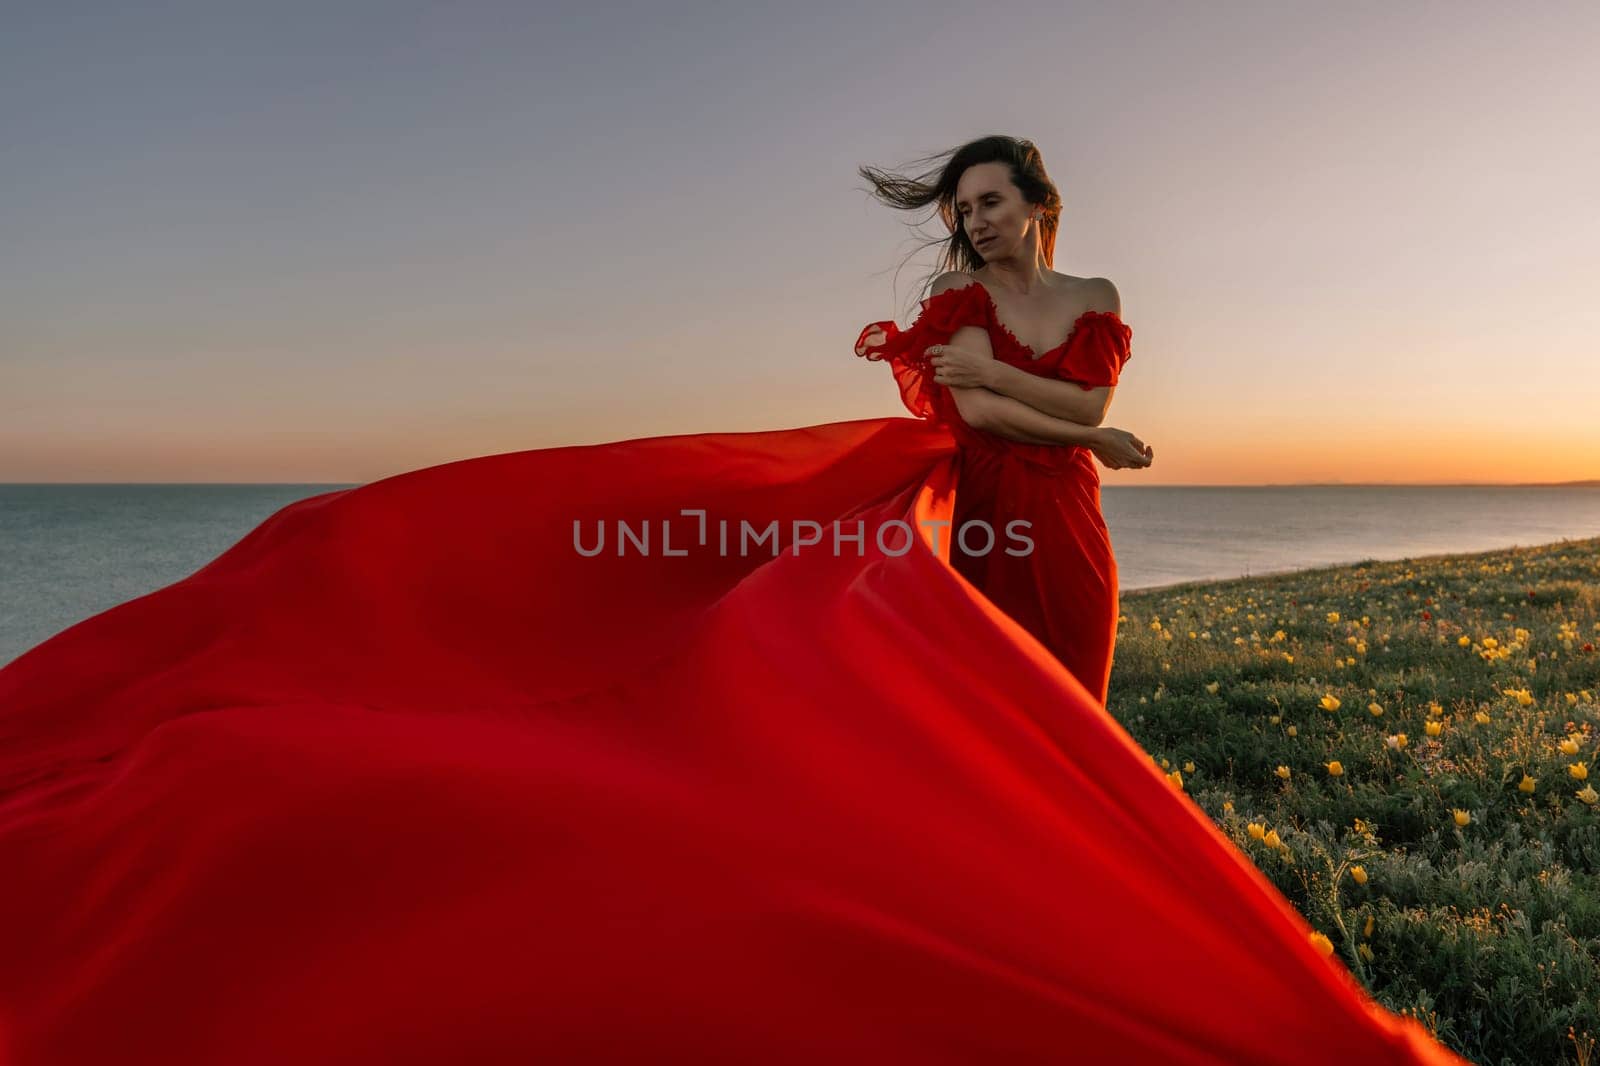 woman red dress standing grassy hillside. The sun is setting in the background, casting a warm glow over the scene. The woman is enjoying the beautiful view and the peaceful atmosphere. by Matiunina